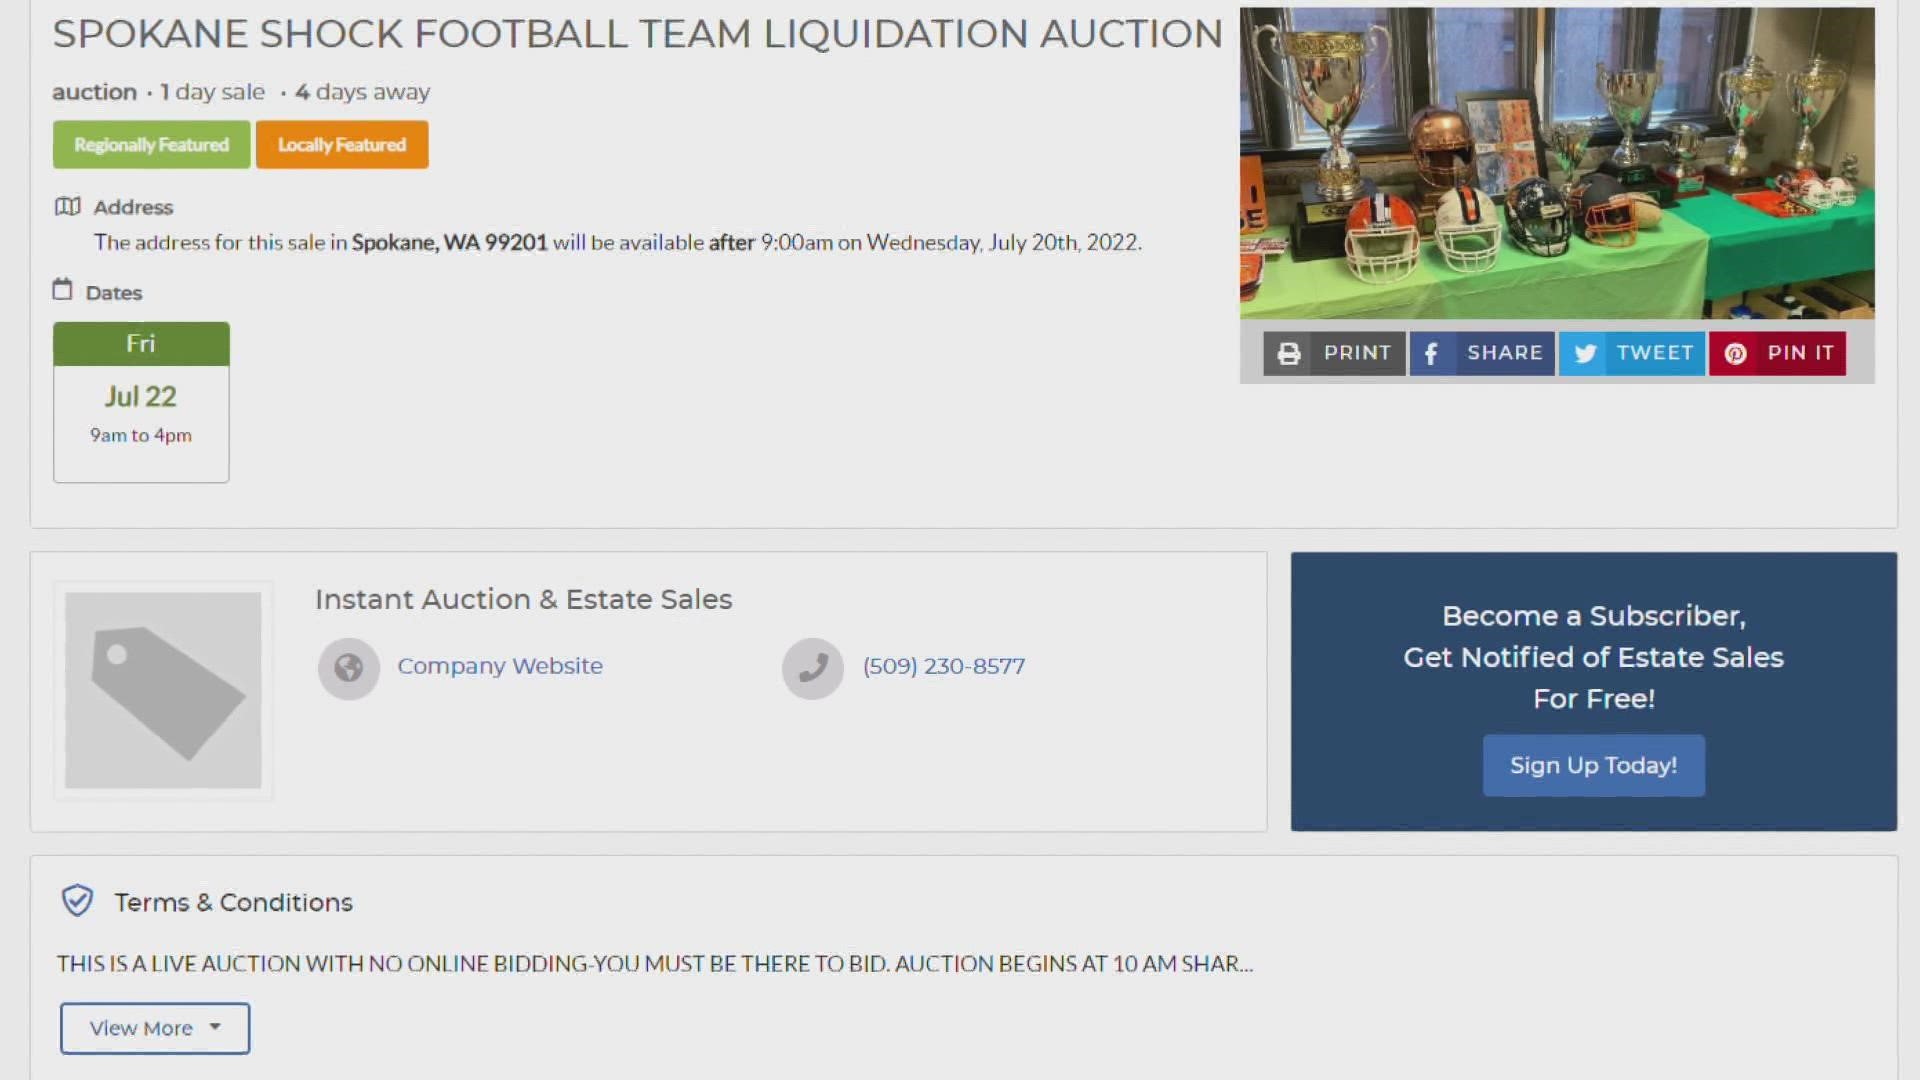 Instant Auction and Estate Sales is planning to auction off hundreds of leftover Spokane Shock items, including jerseys, merchandise, office furniture and trophies.